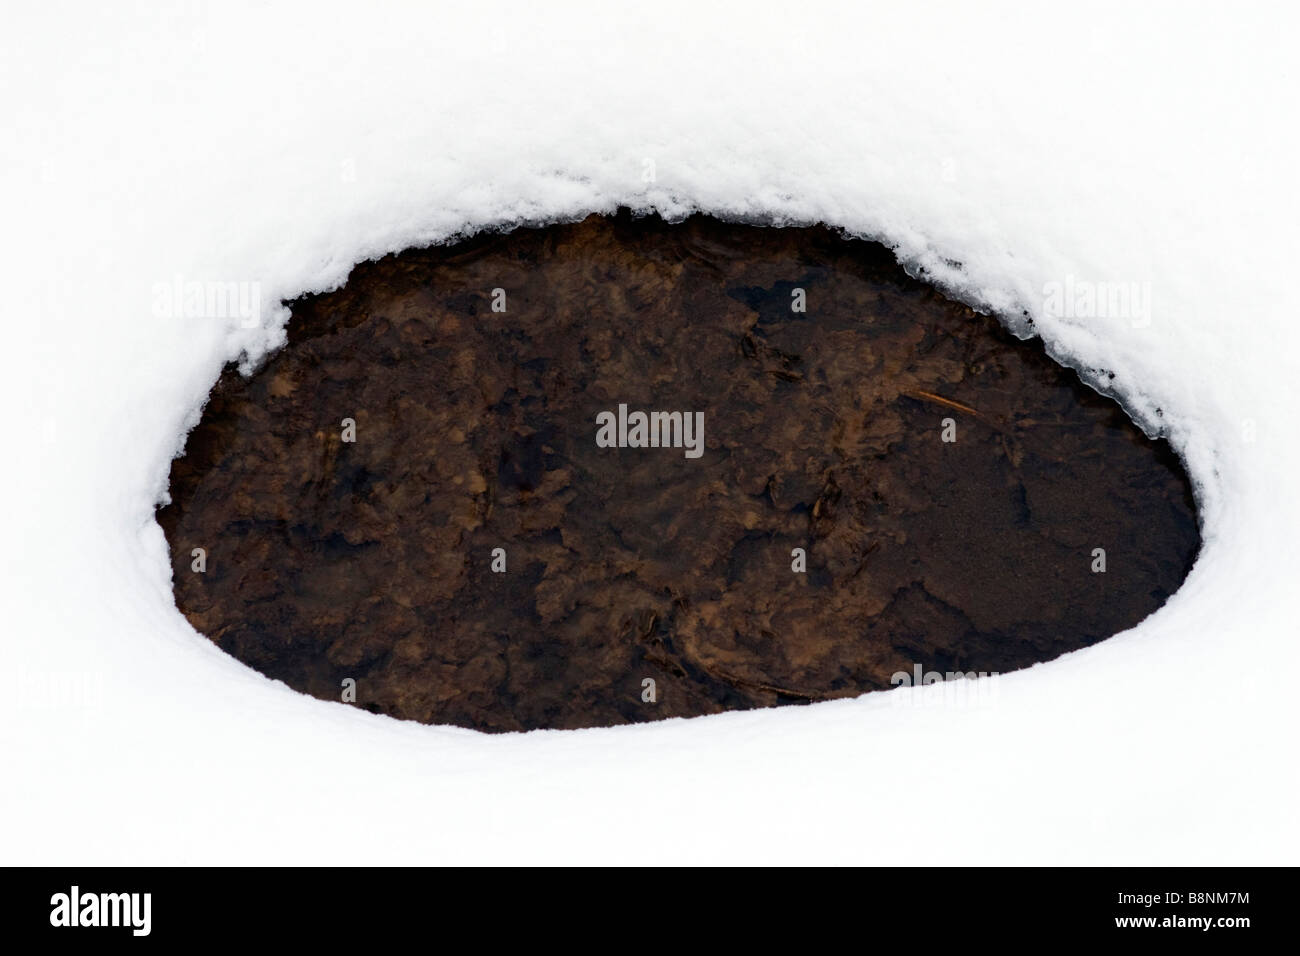 Oval thawed patch on the ice covering river stream in spring. Stock Photo